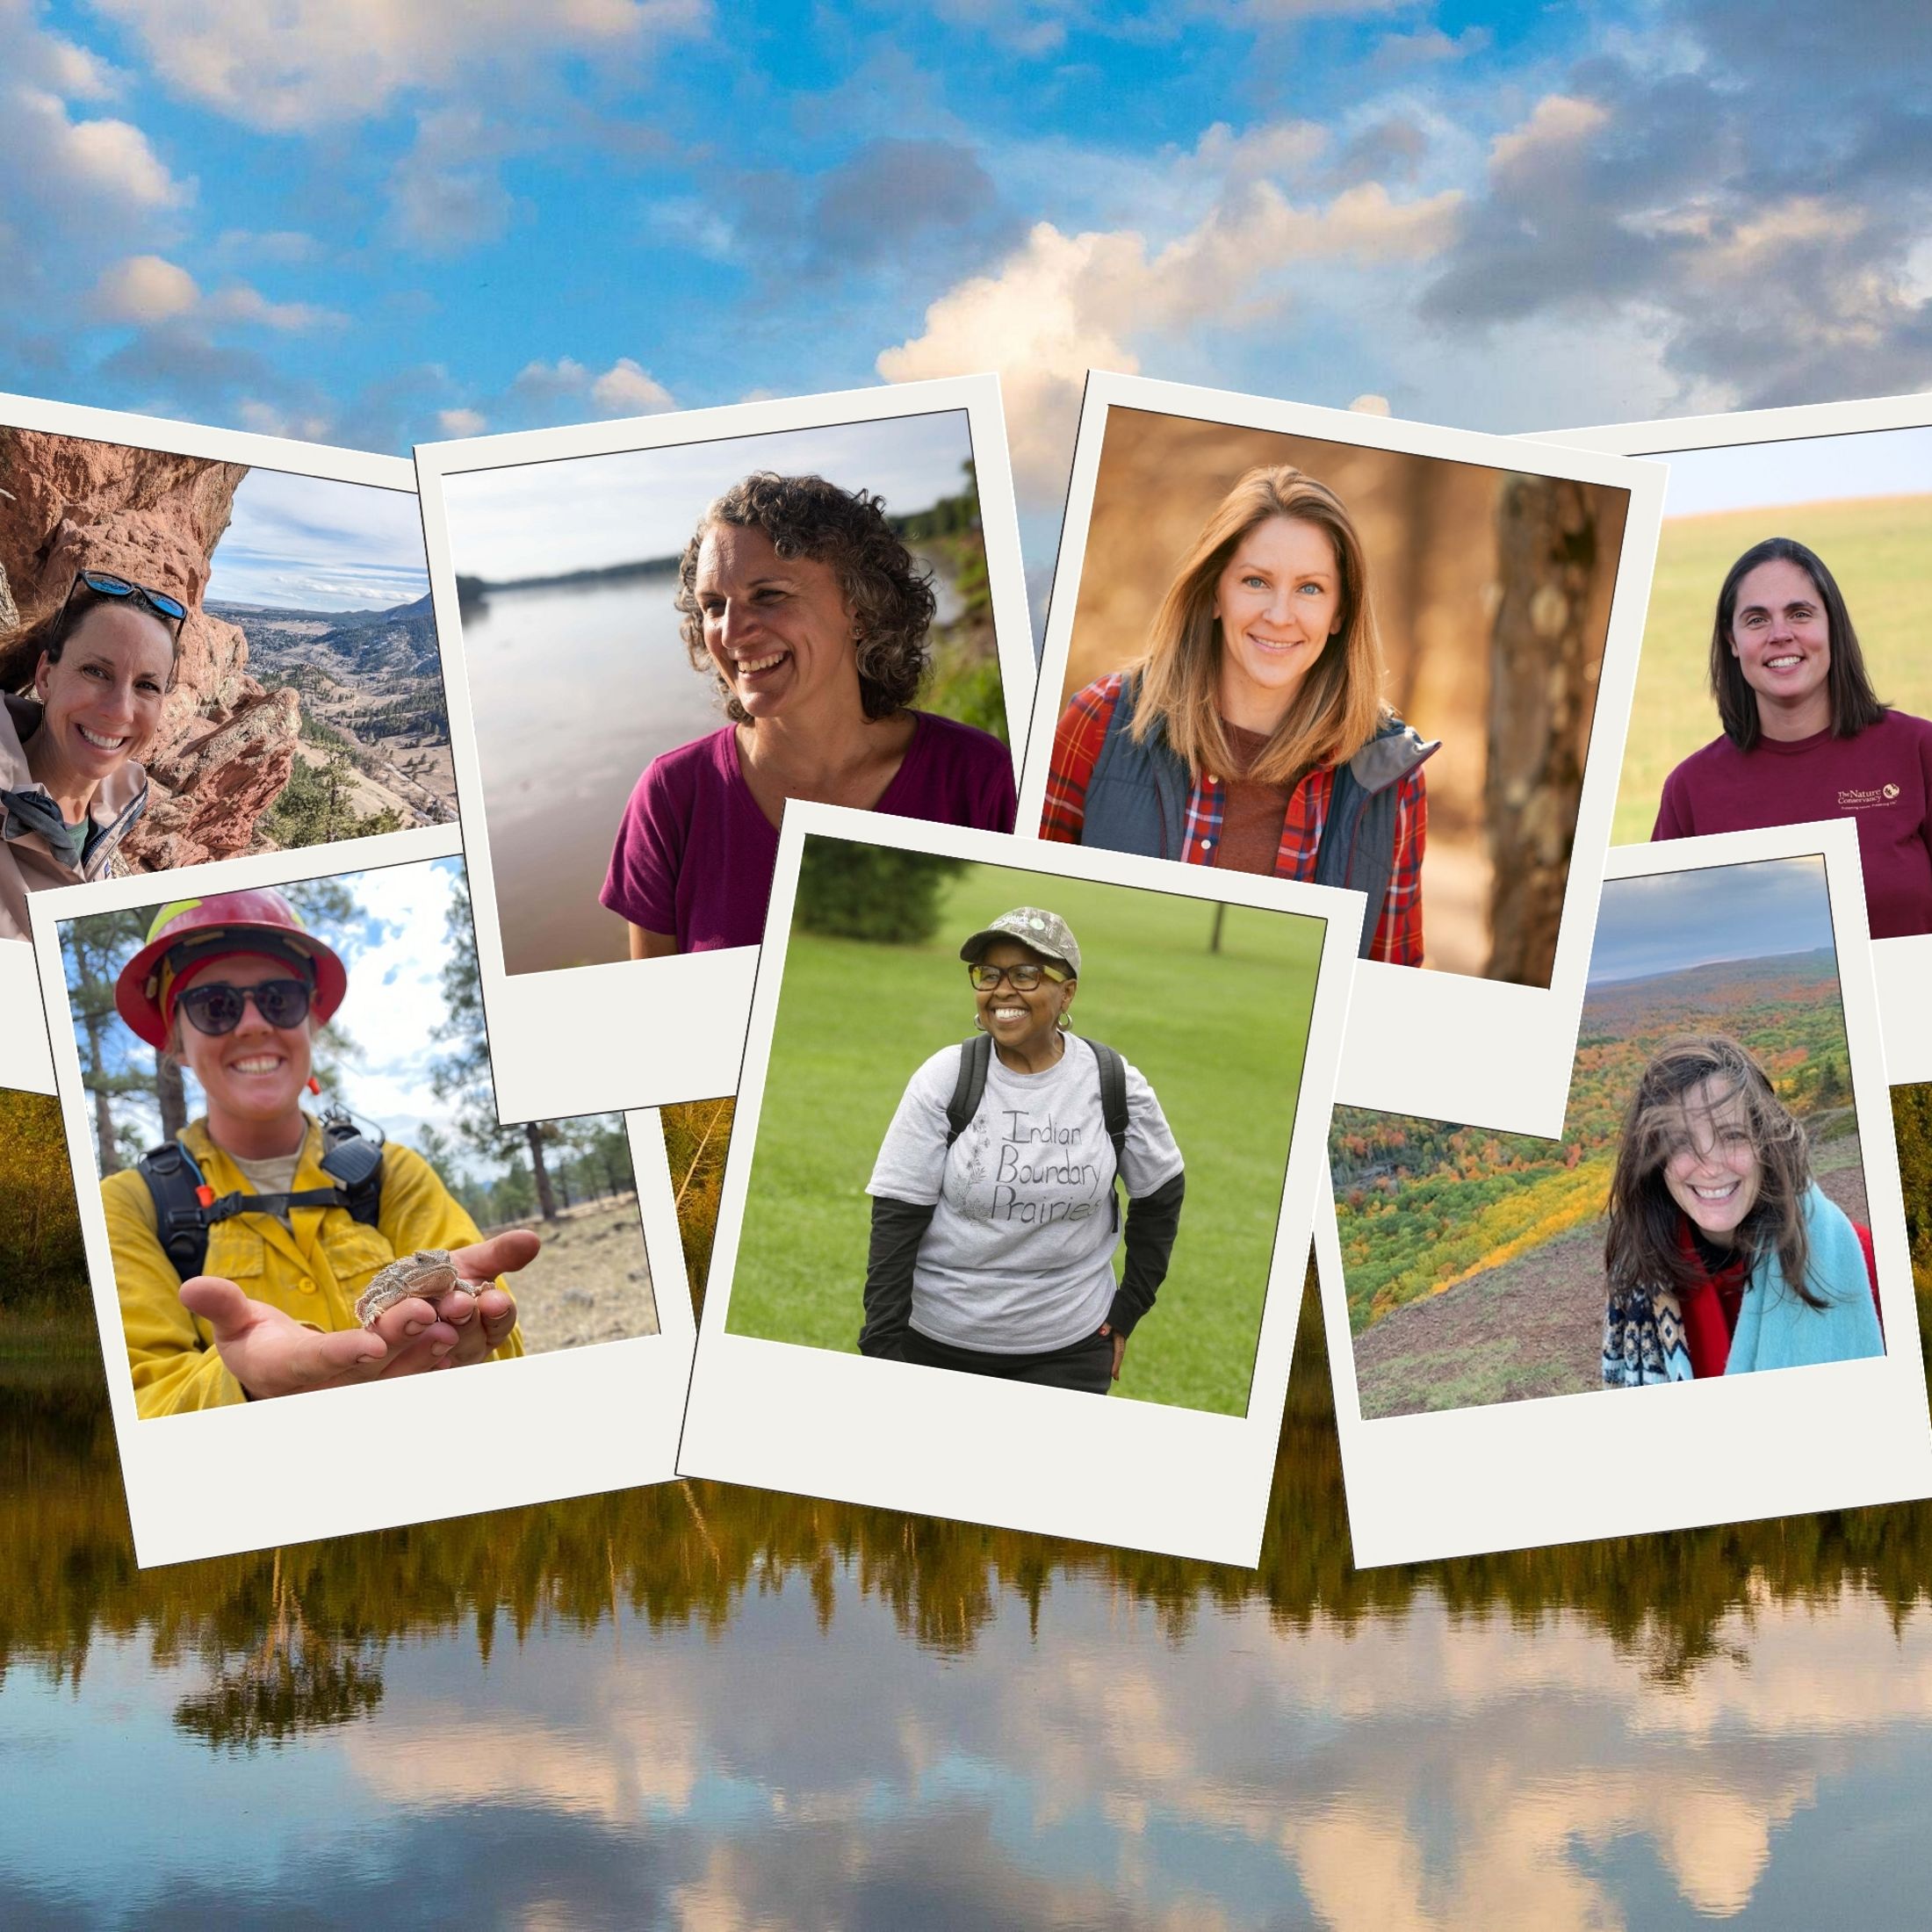 A collage of photos of seven diffferent women over a background of a photo of lake. 